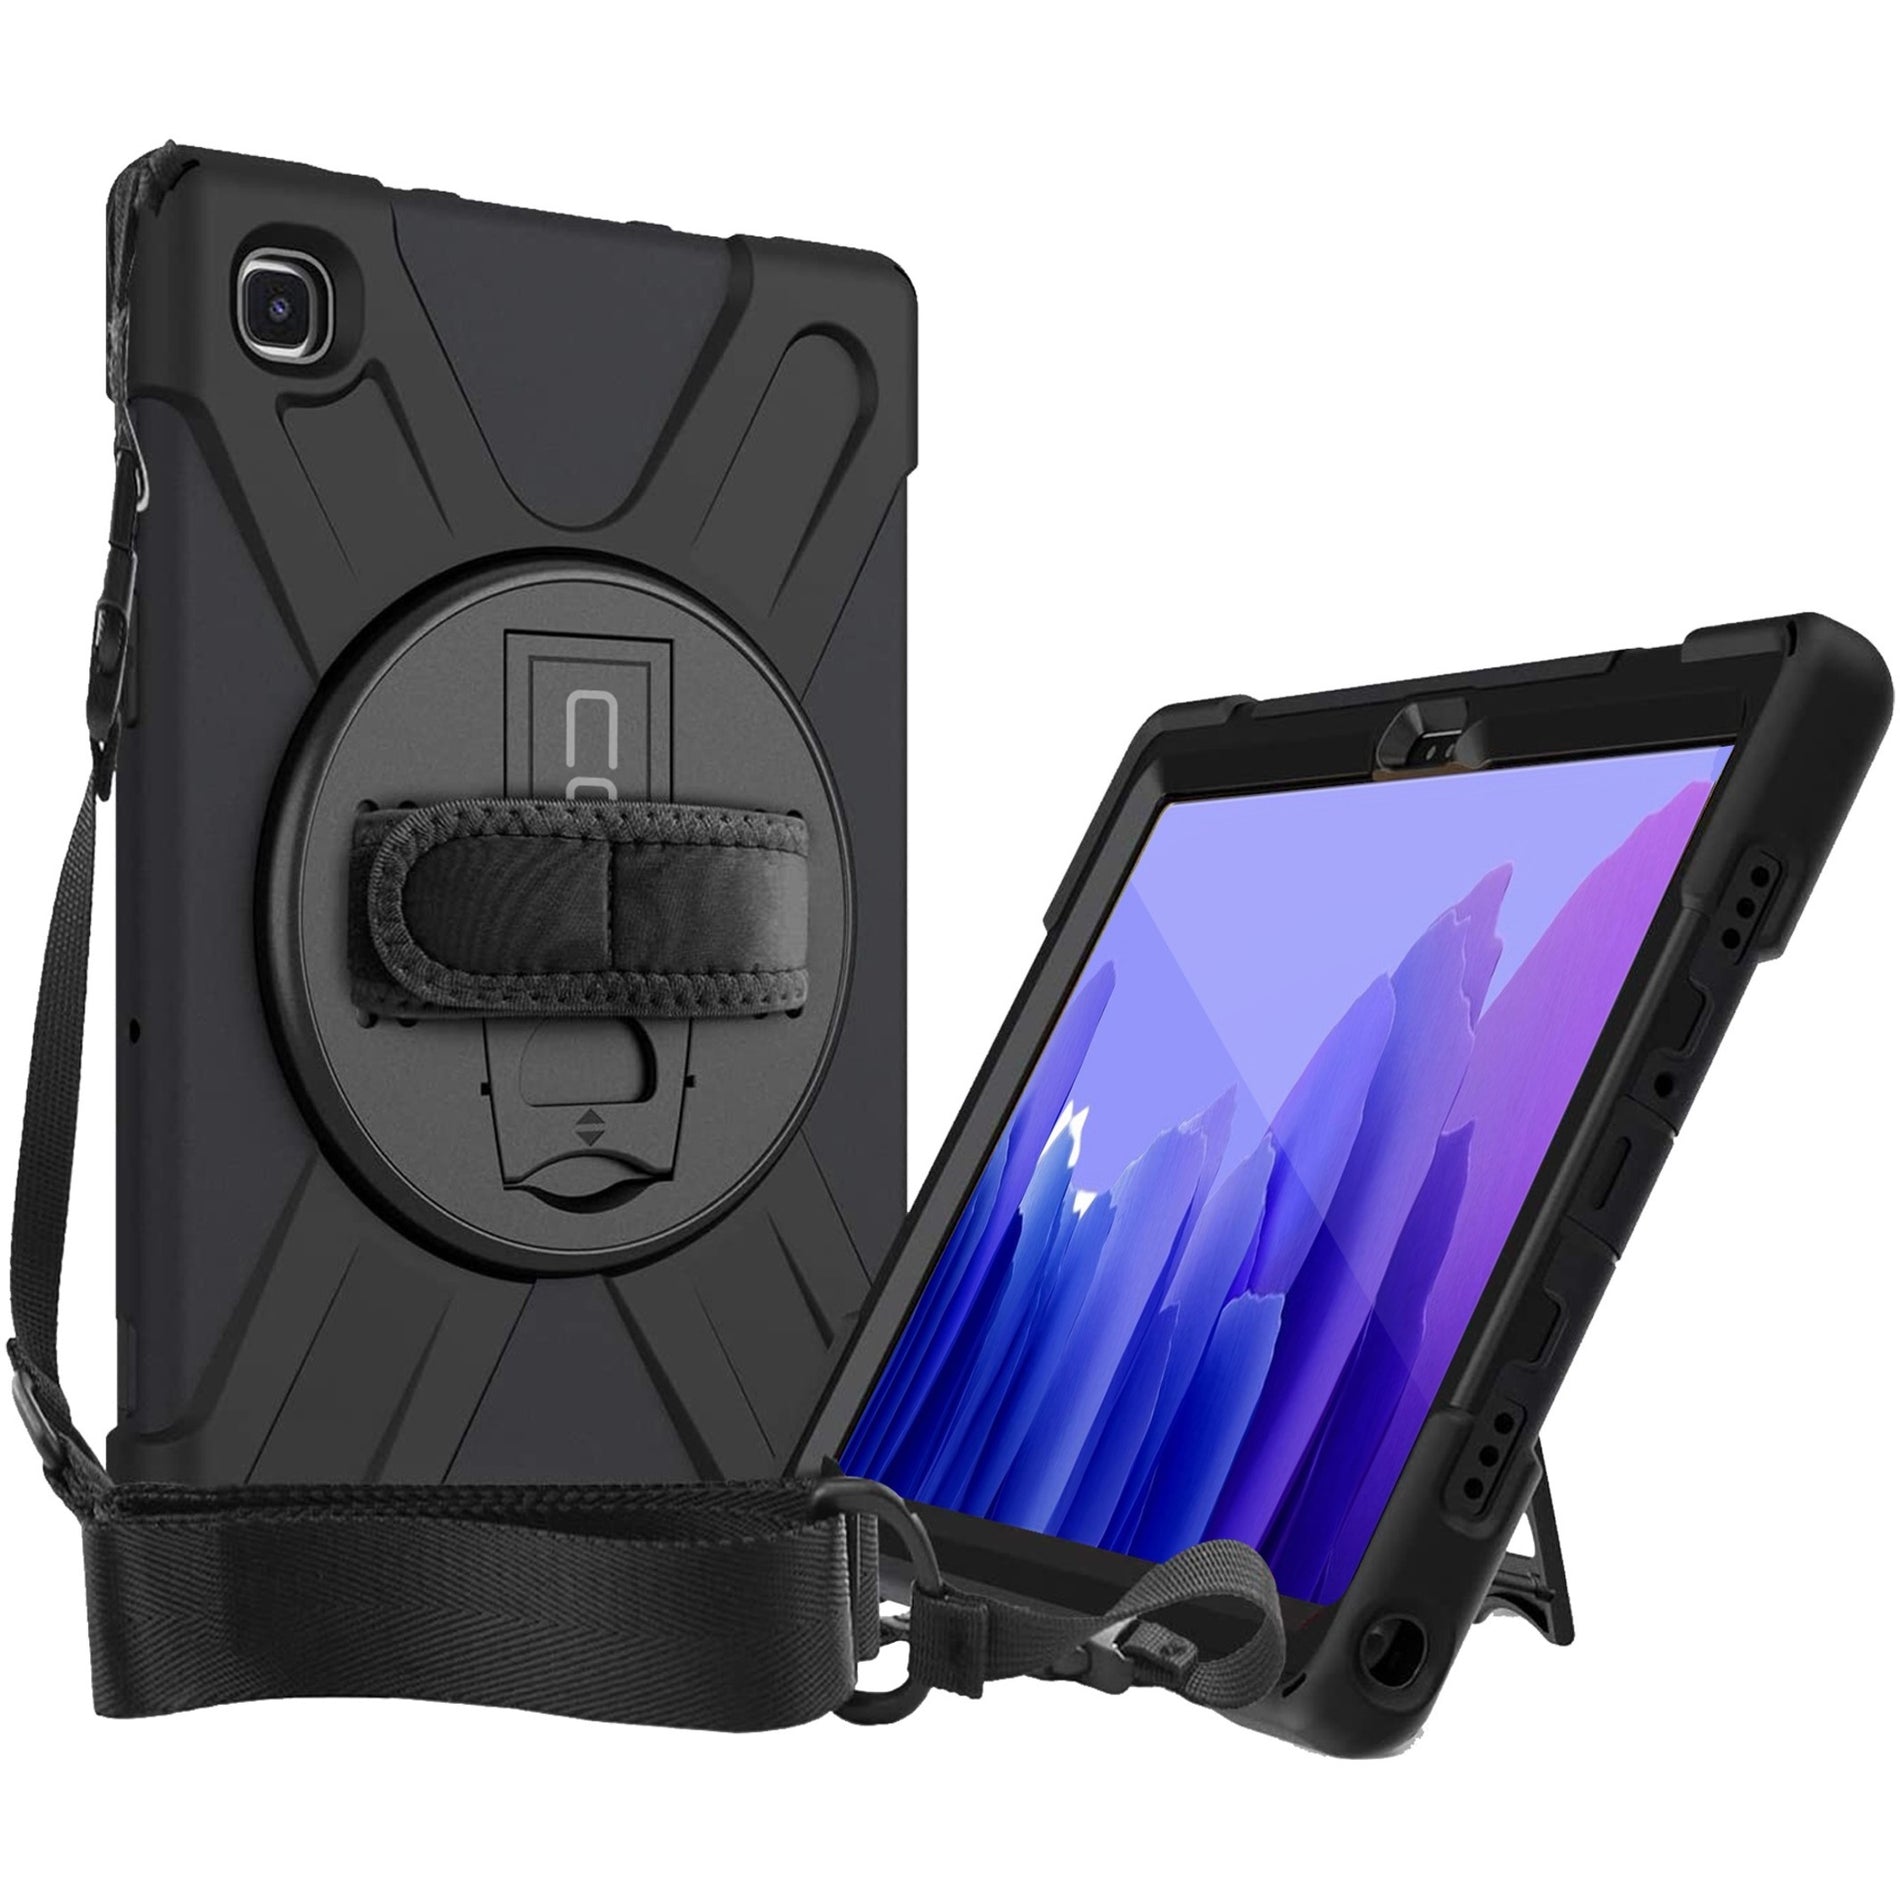 CODi C30705066 Rugged Tablet Case, Compatible with Samsung Galaxy Tab A8, Black, Adjustable Strap, Hand and Shoulder Carrying Options